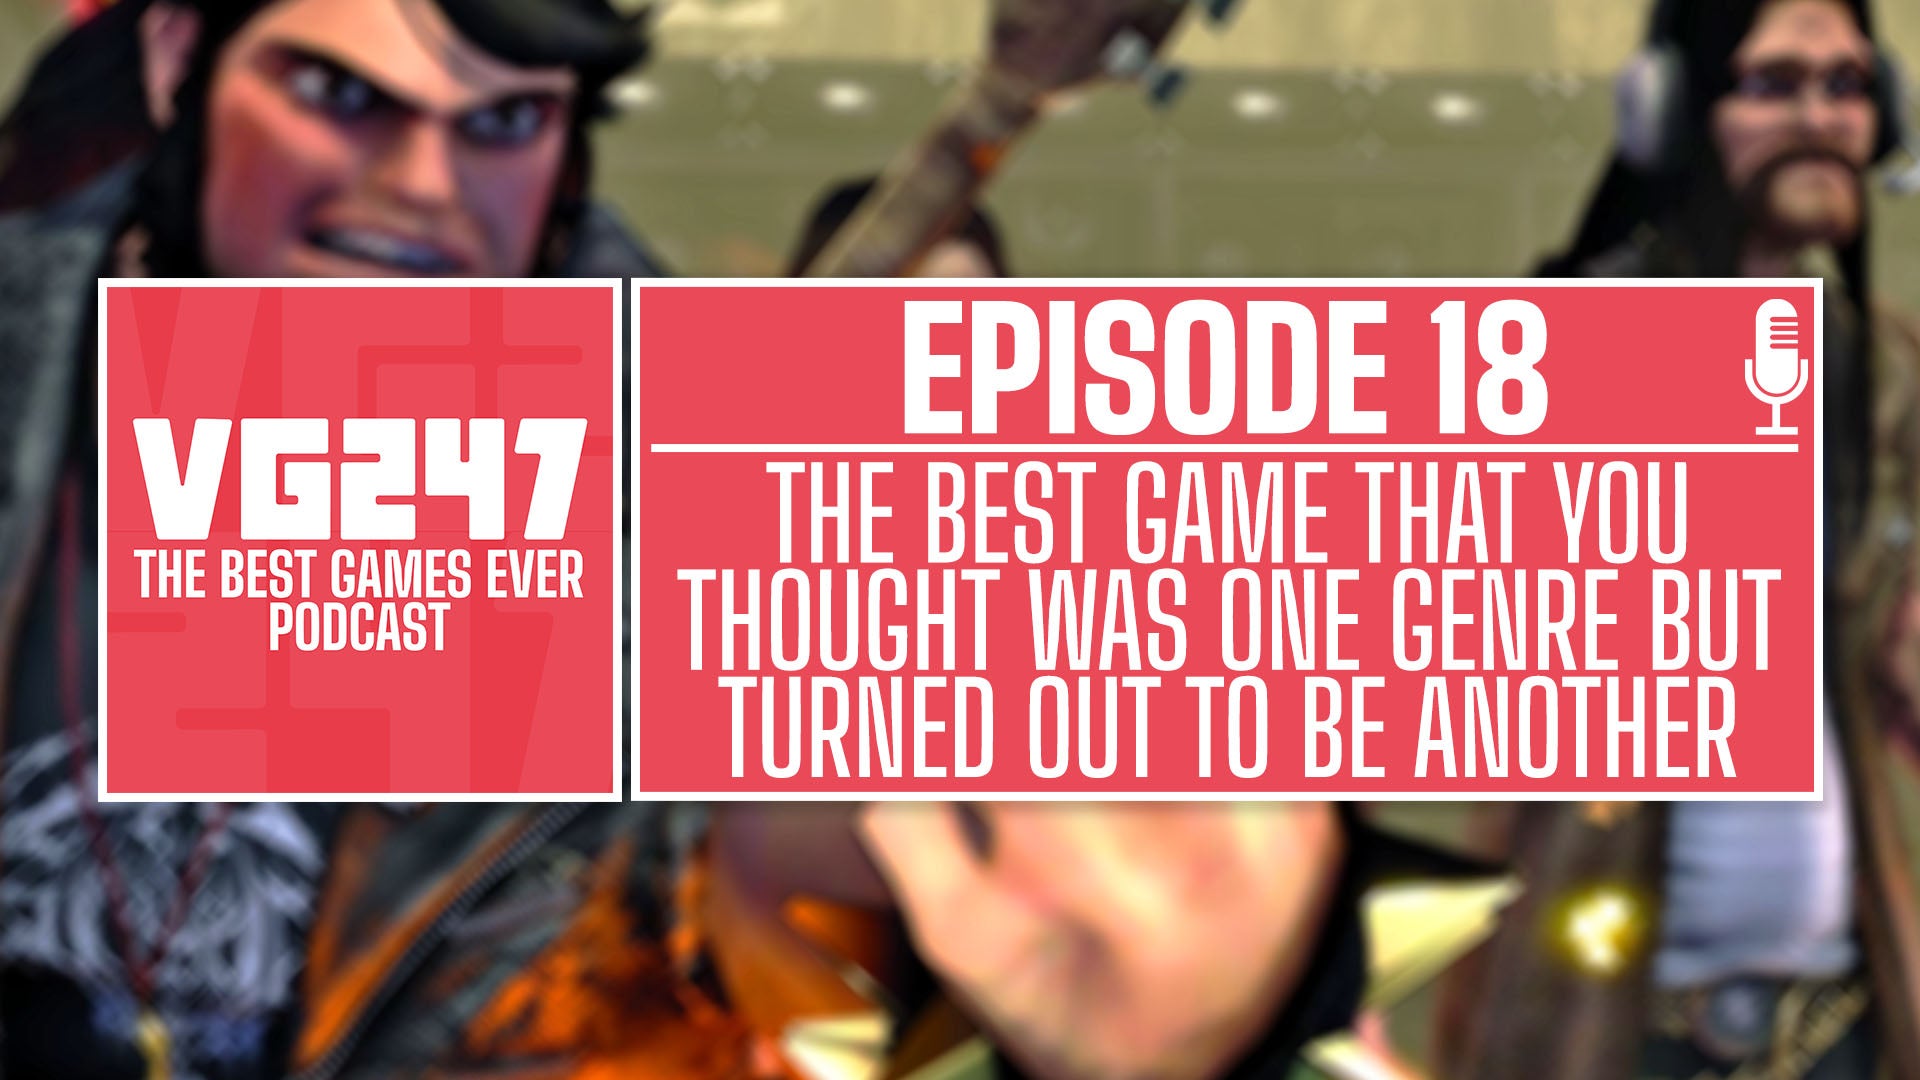 VG247’s The Best Games Ever Podcast – Ep.18: The best game you thought was one genre but turned out to be another